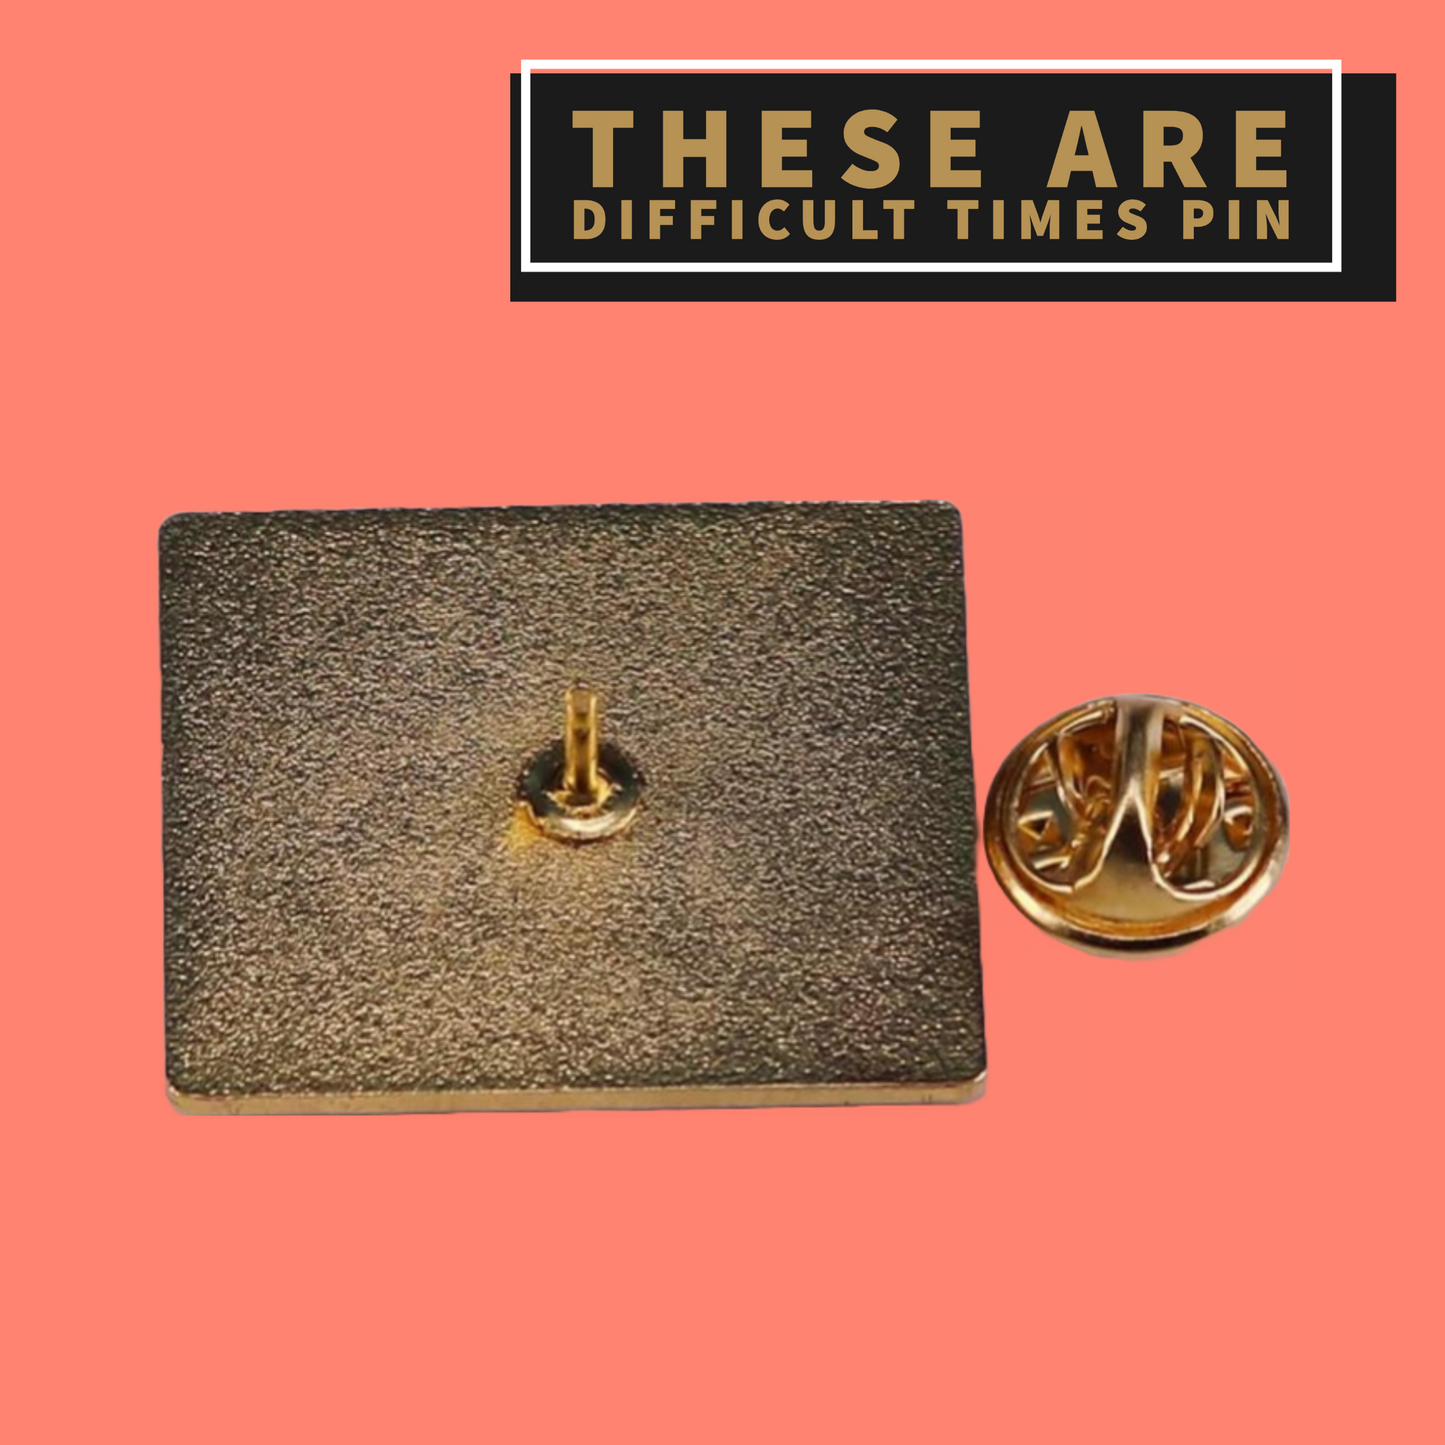 'These Are Difficult Times' Enamel Pin